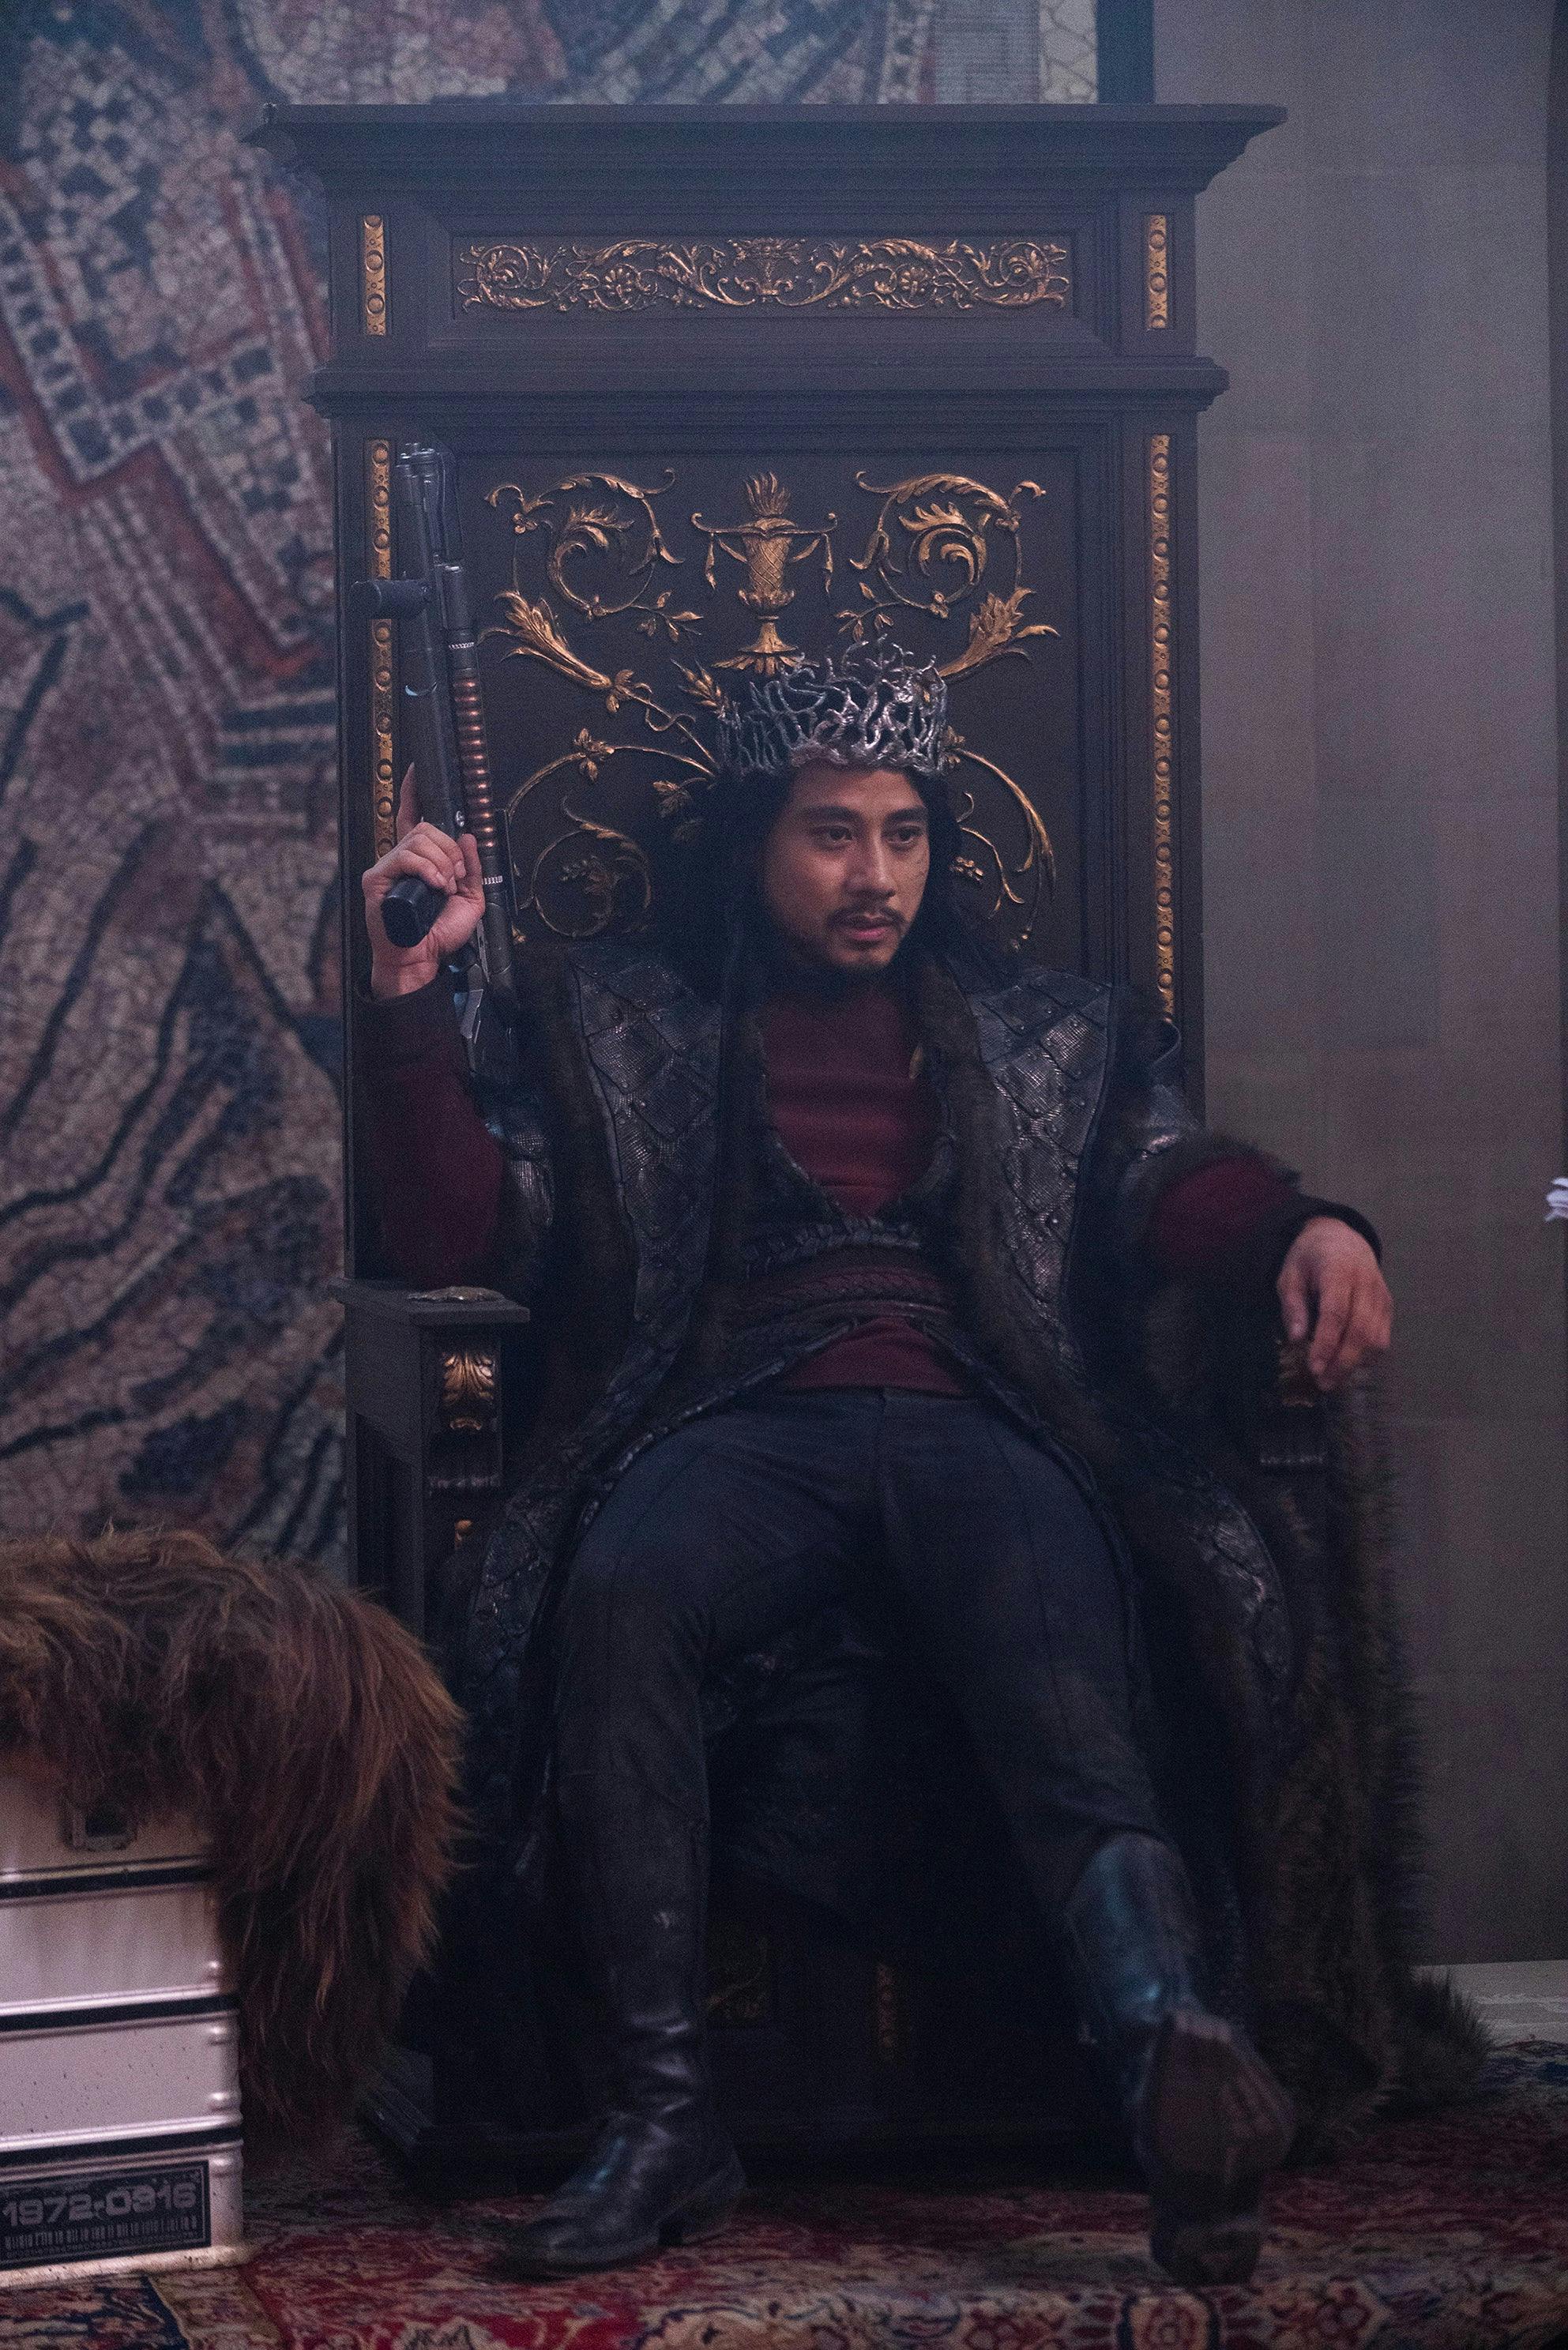 The High Lord of Kalar and Pike's former Yeoman, Zacarias, wearing a stylized crown, sits on the palace throne in 'Among the Lotus Eaters'